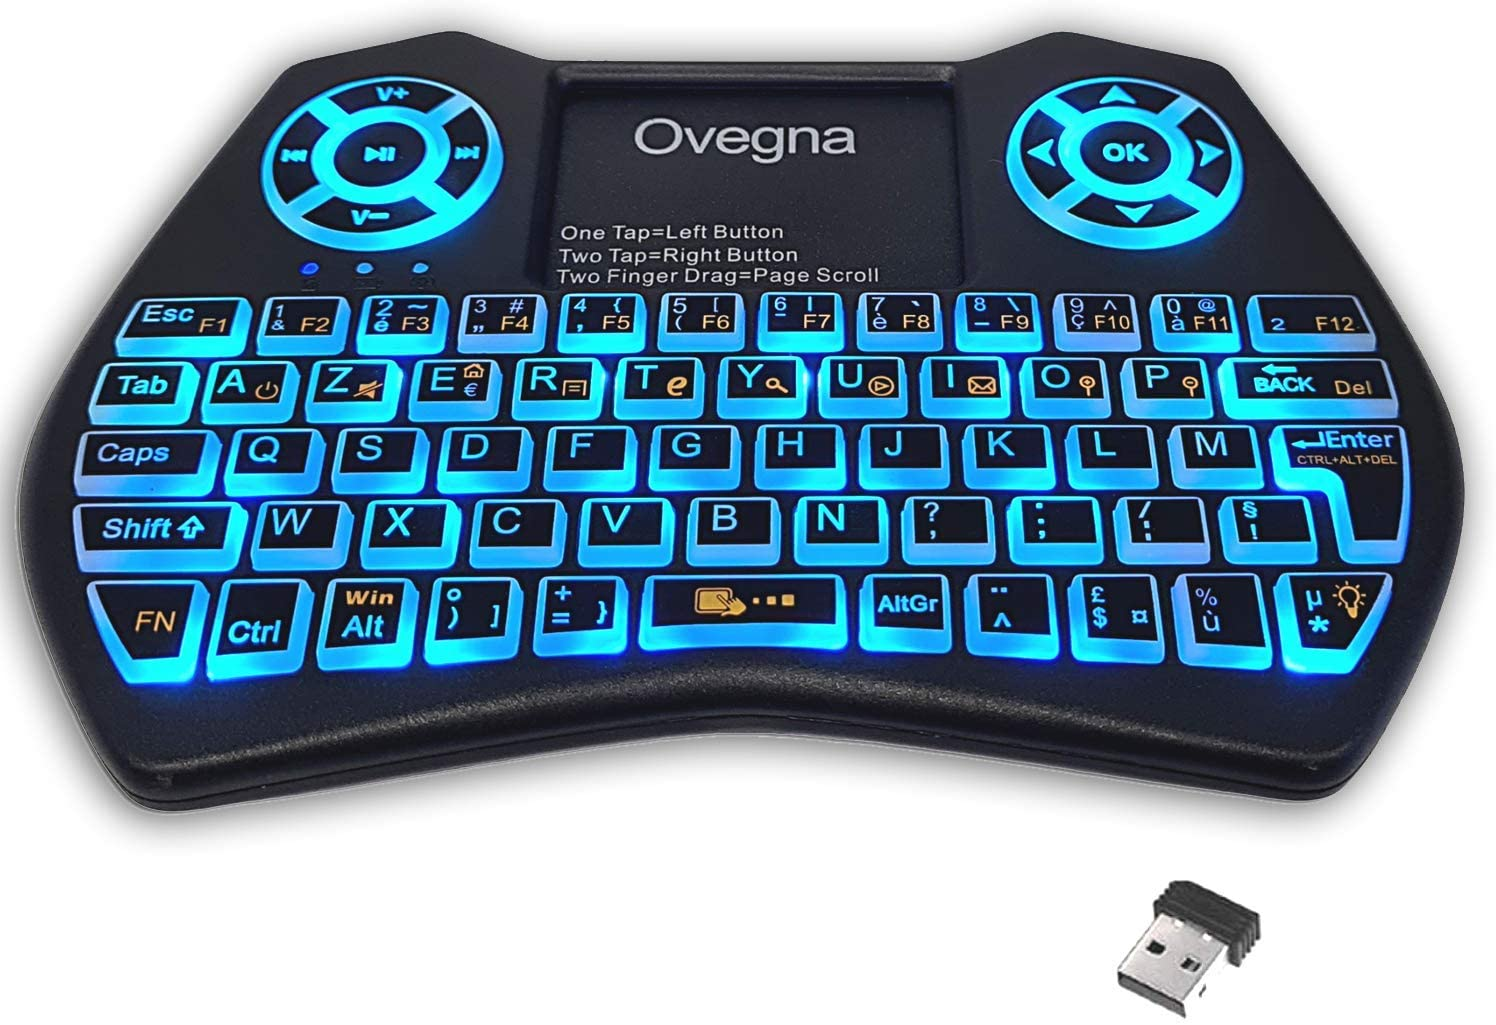 ovegna-i12-mini-wireless-azerty-keyboard-2-4-ghz-touchpad-rechargeable-battery-7-color-backlight-for-smart-tv-pc-mini-pc-mac-raspberry-pi-2-3-4-laptop-and-android-box--140